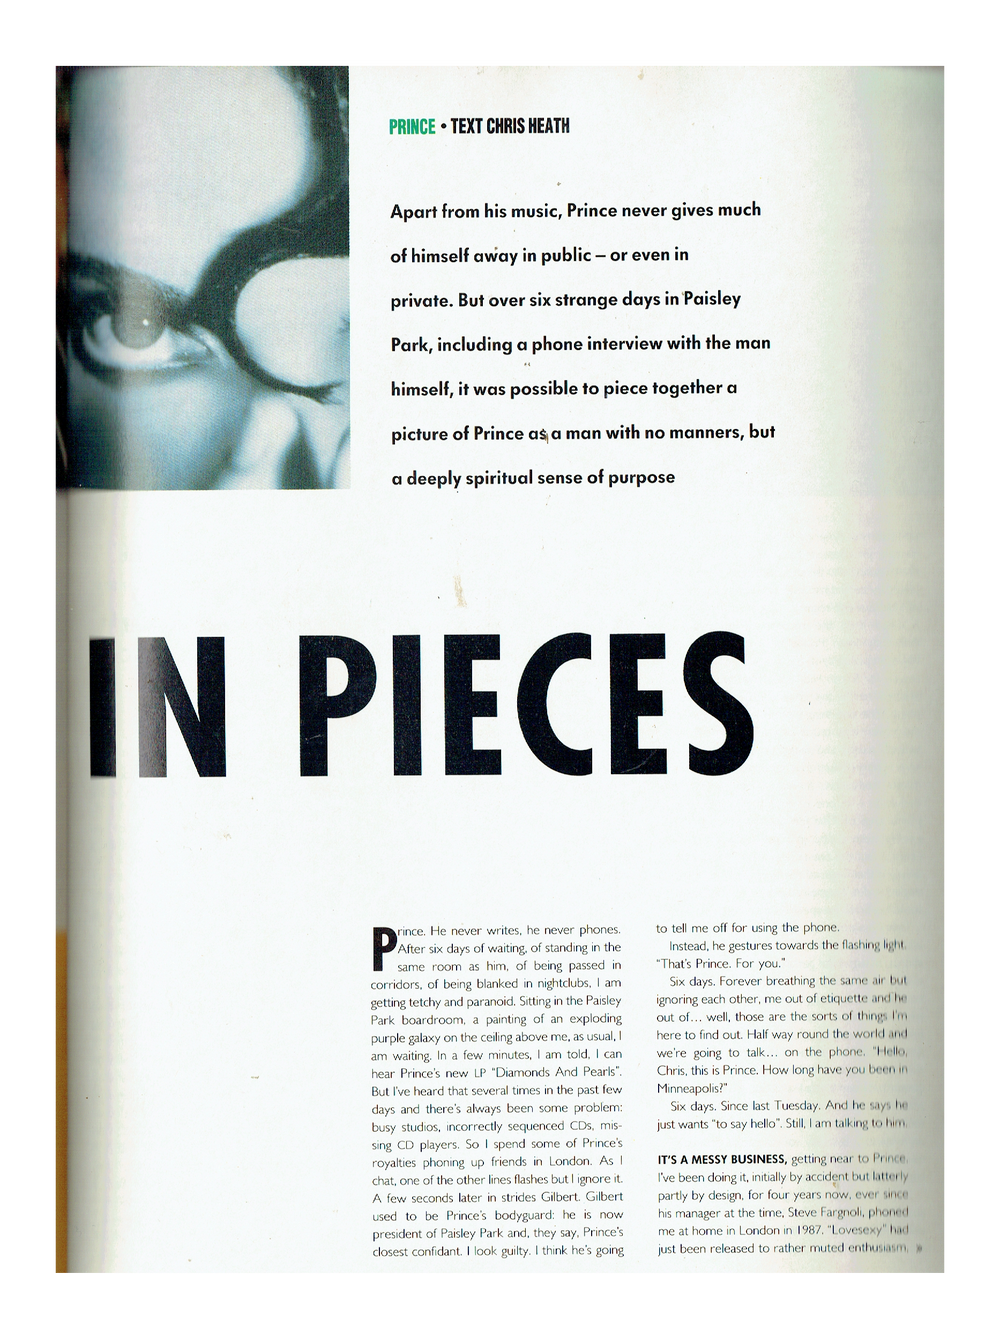 Prince – The Face UK Magazine December 1991 Prince Speaks 7 Page Article